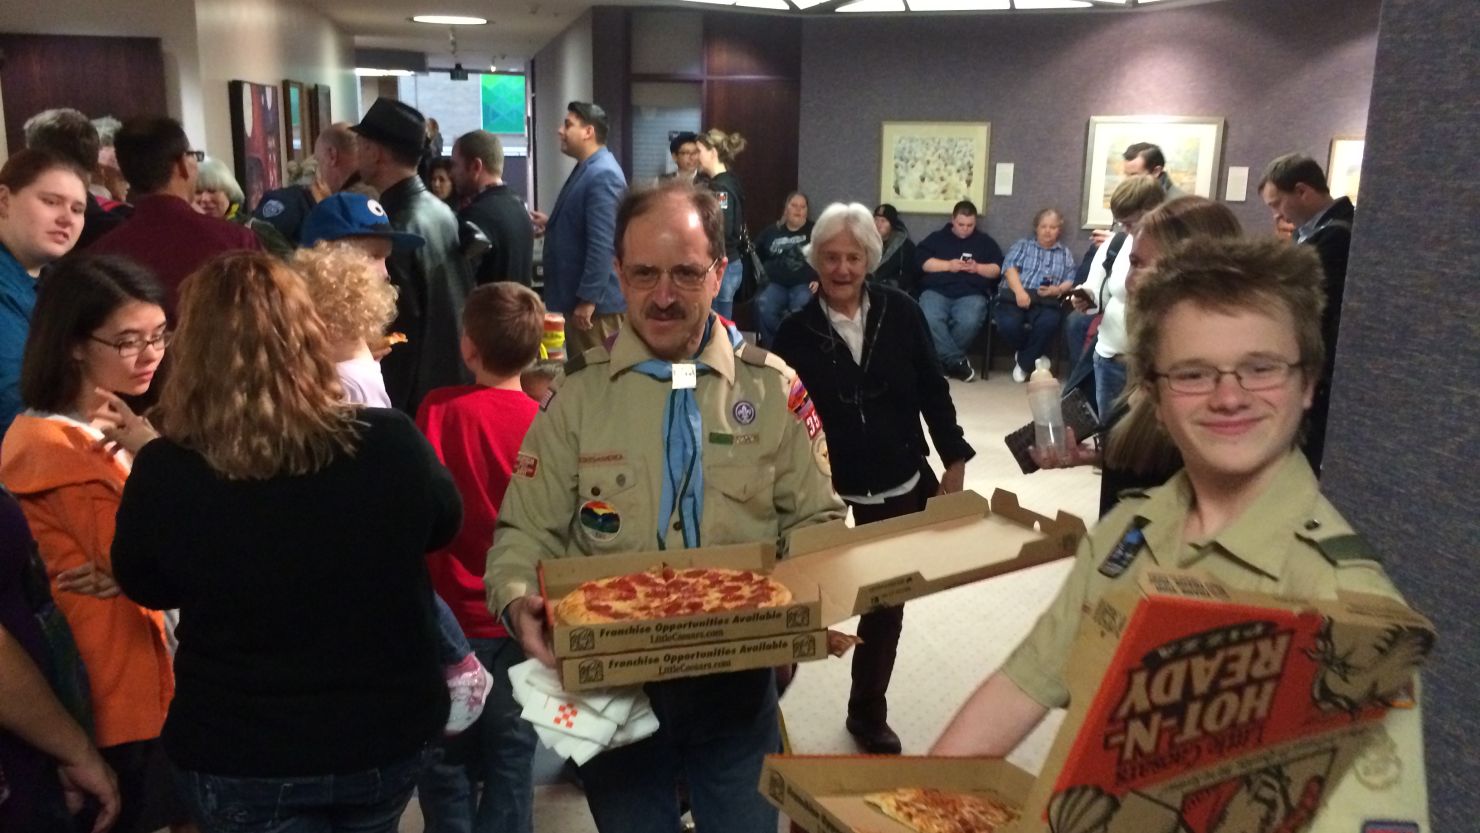 Peter Brownstein and his son deliver pizzas at the county clerk's office in Salt Lake City. He later wore a rainbow kerchief.